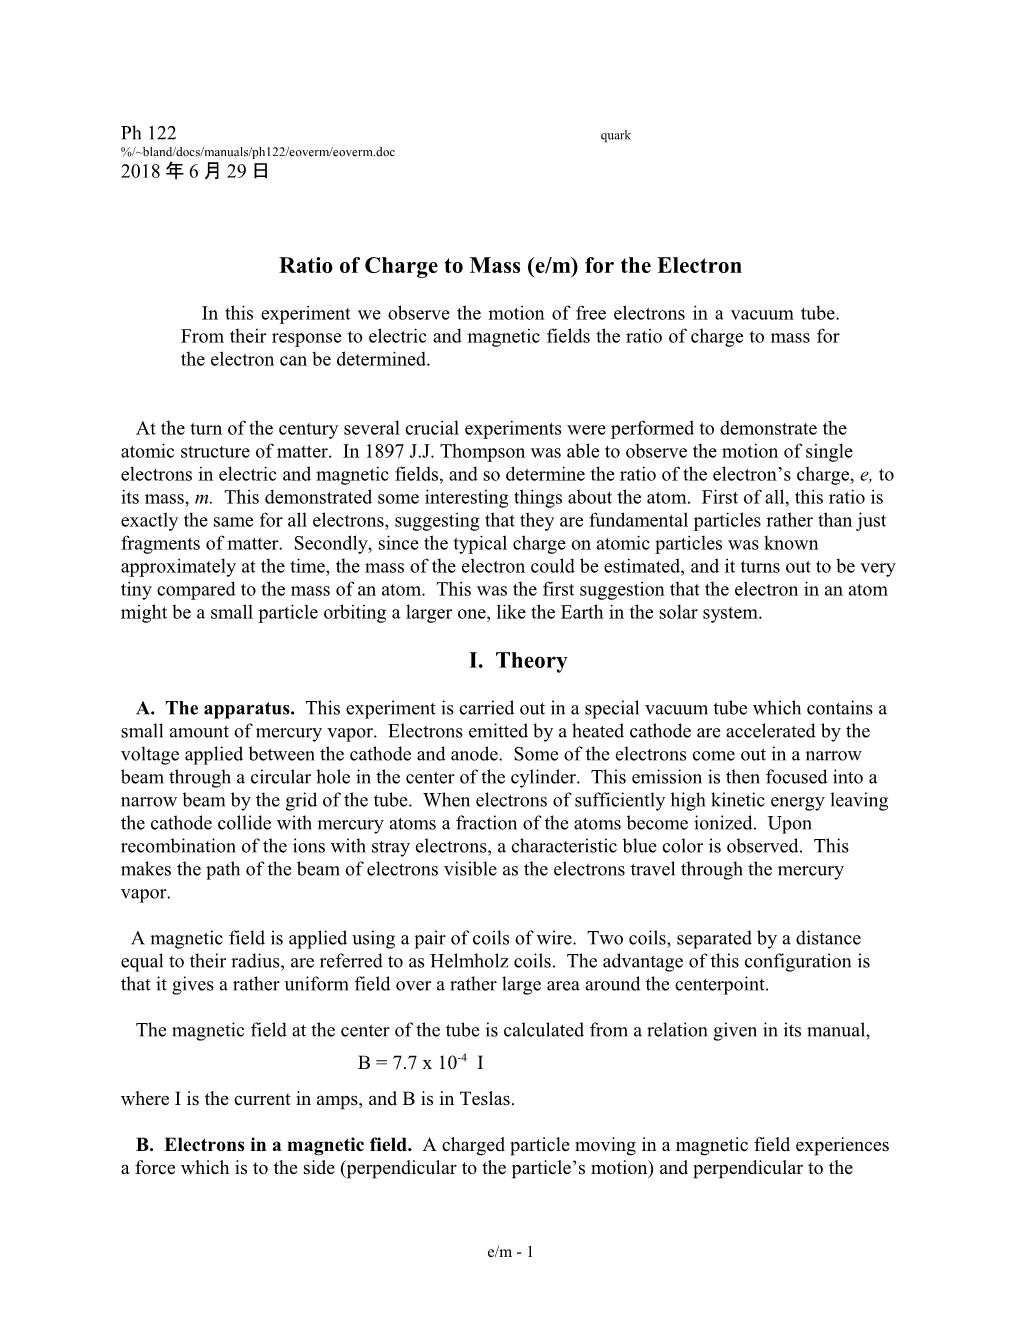 Ratio of Charge to Mass (E/M) for the Electron